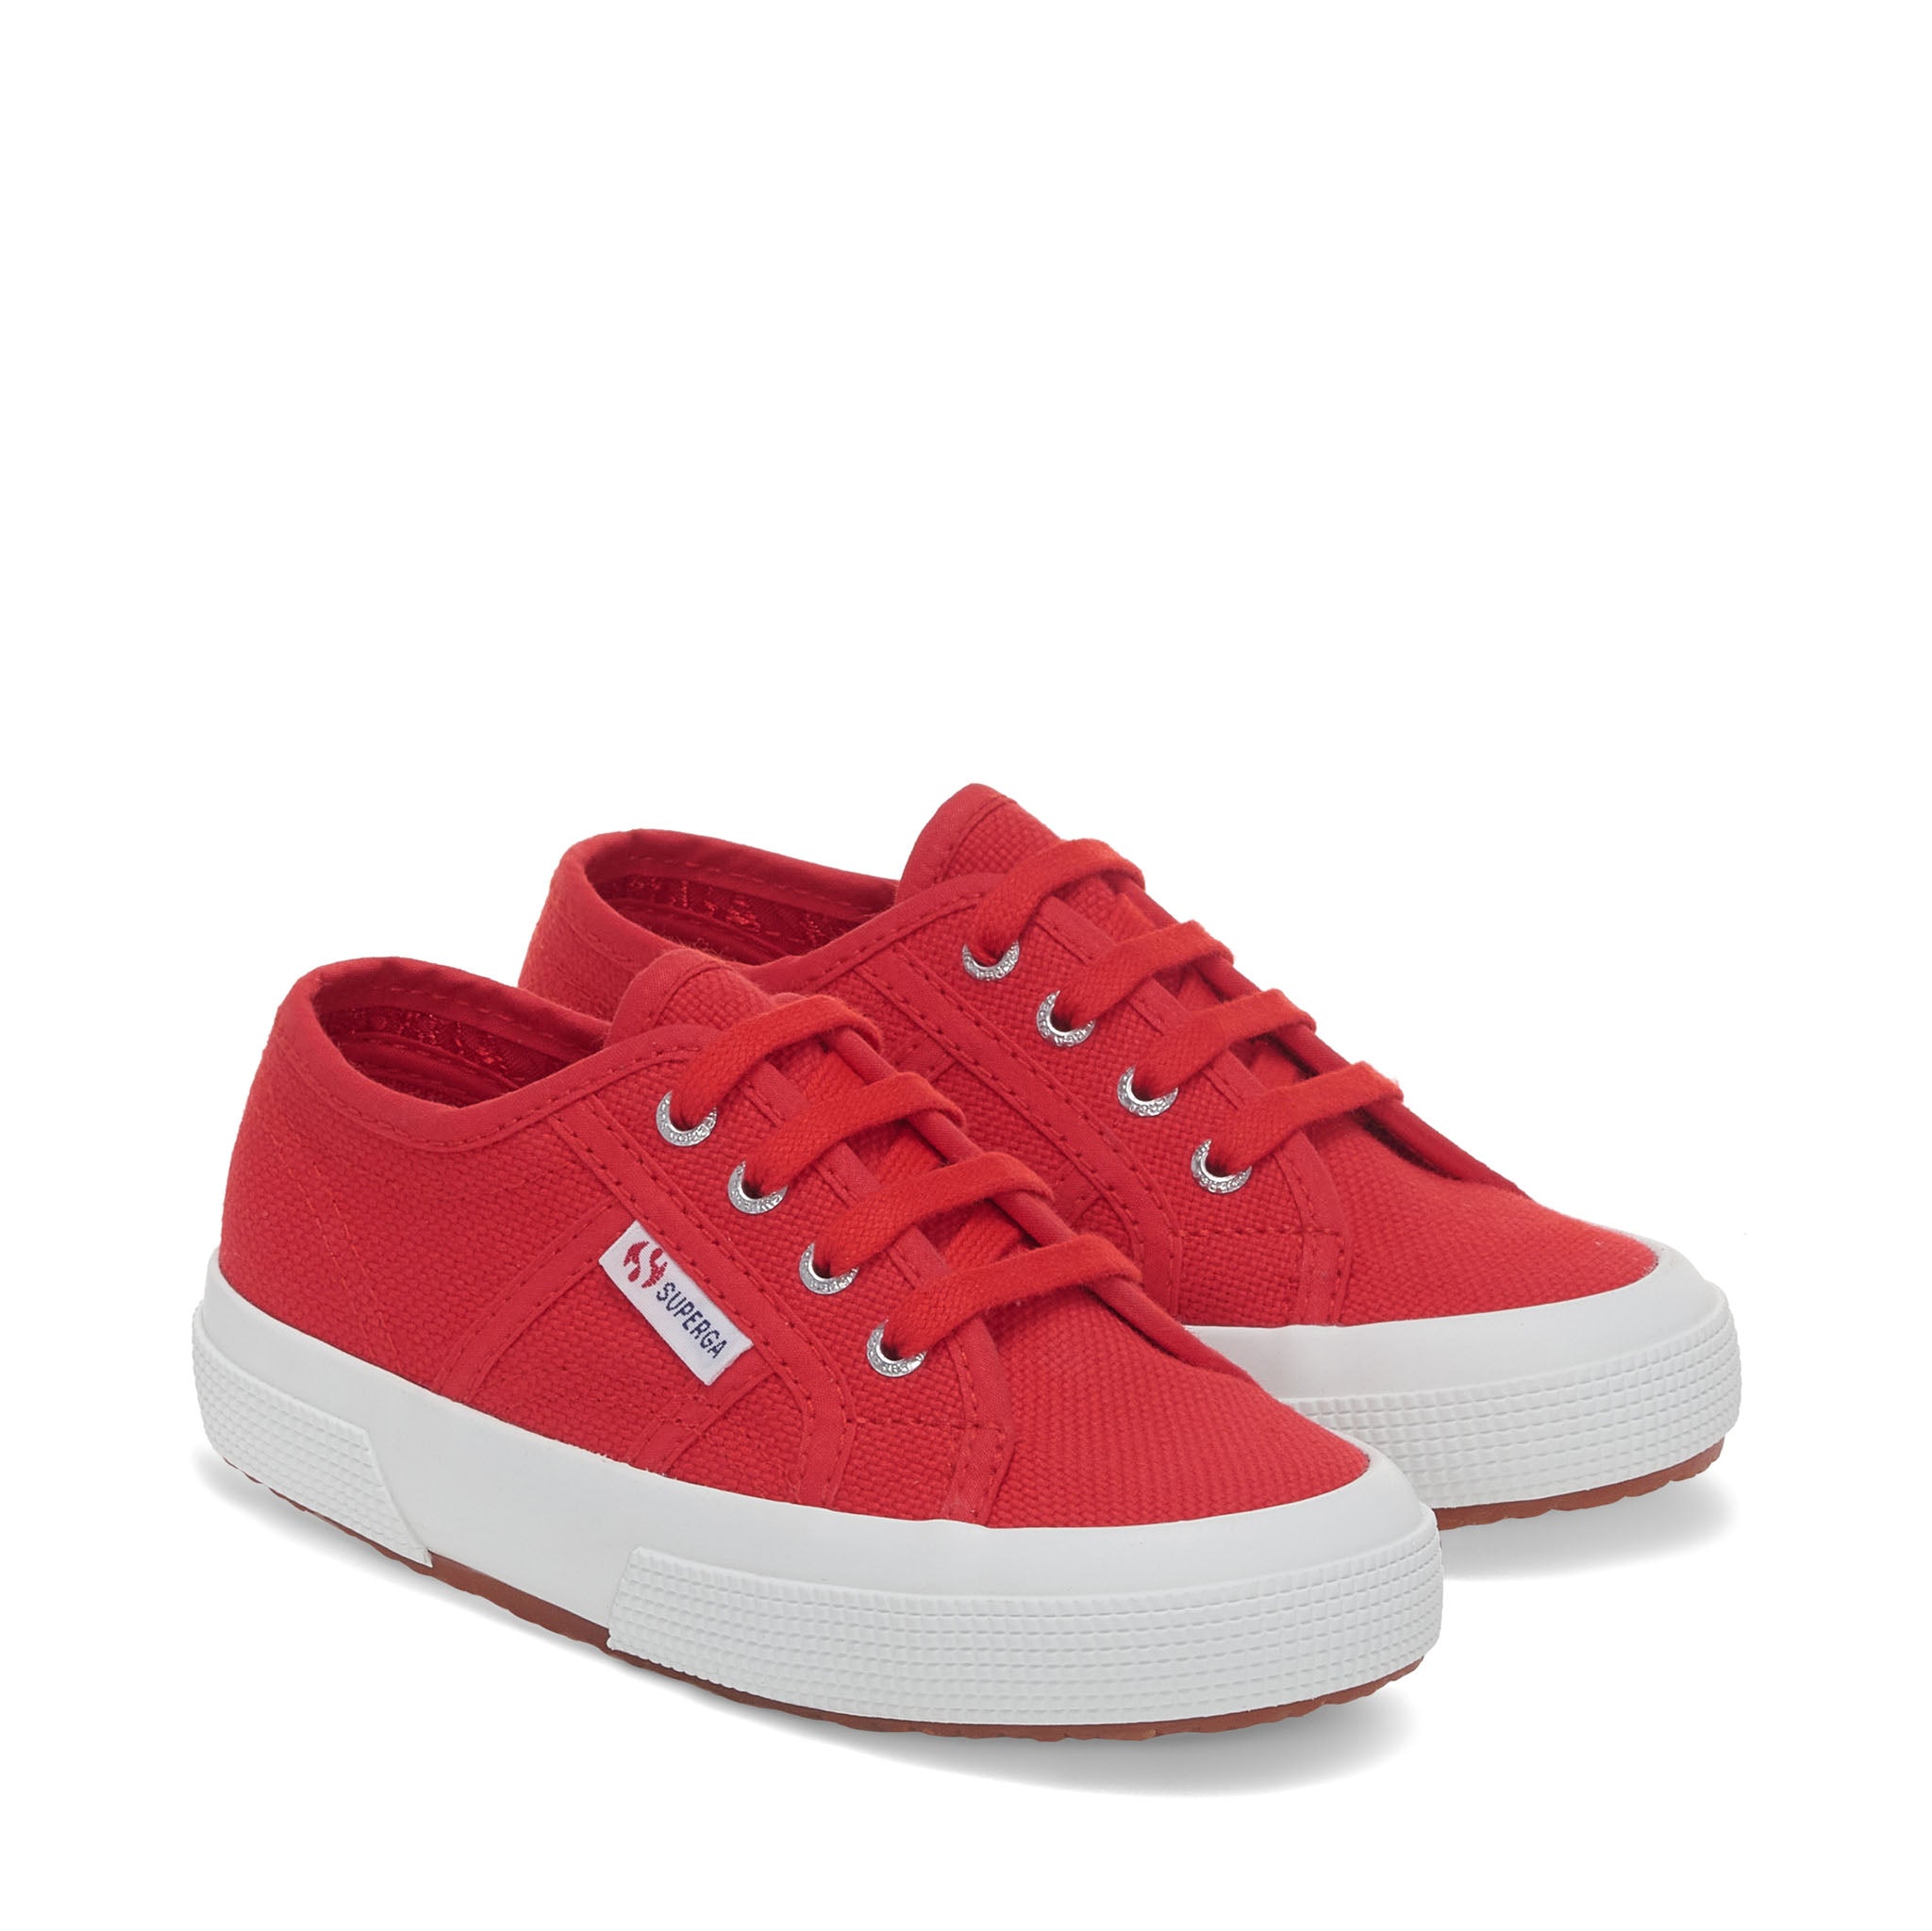 Superga 2750 Kids Jcot Classic Sneakers - Red White. Front view.